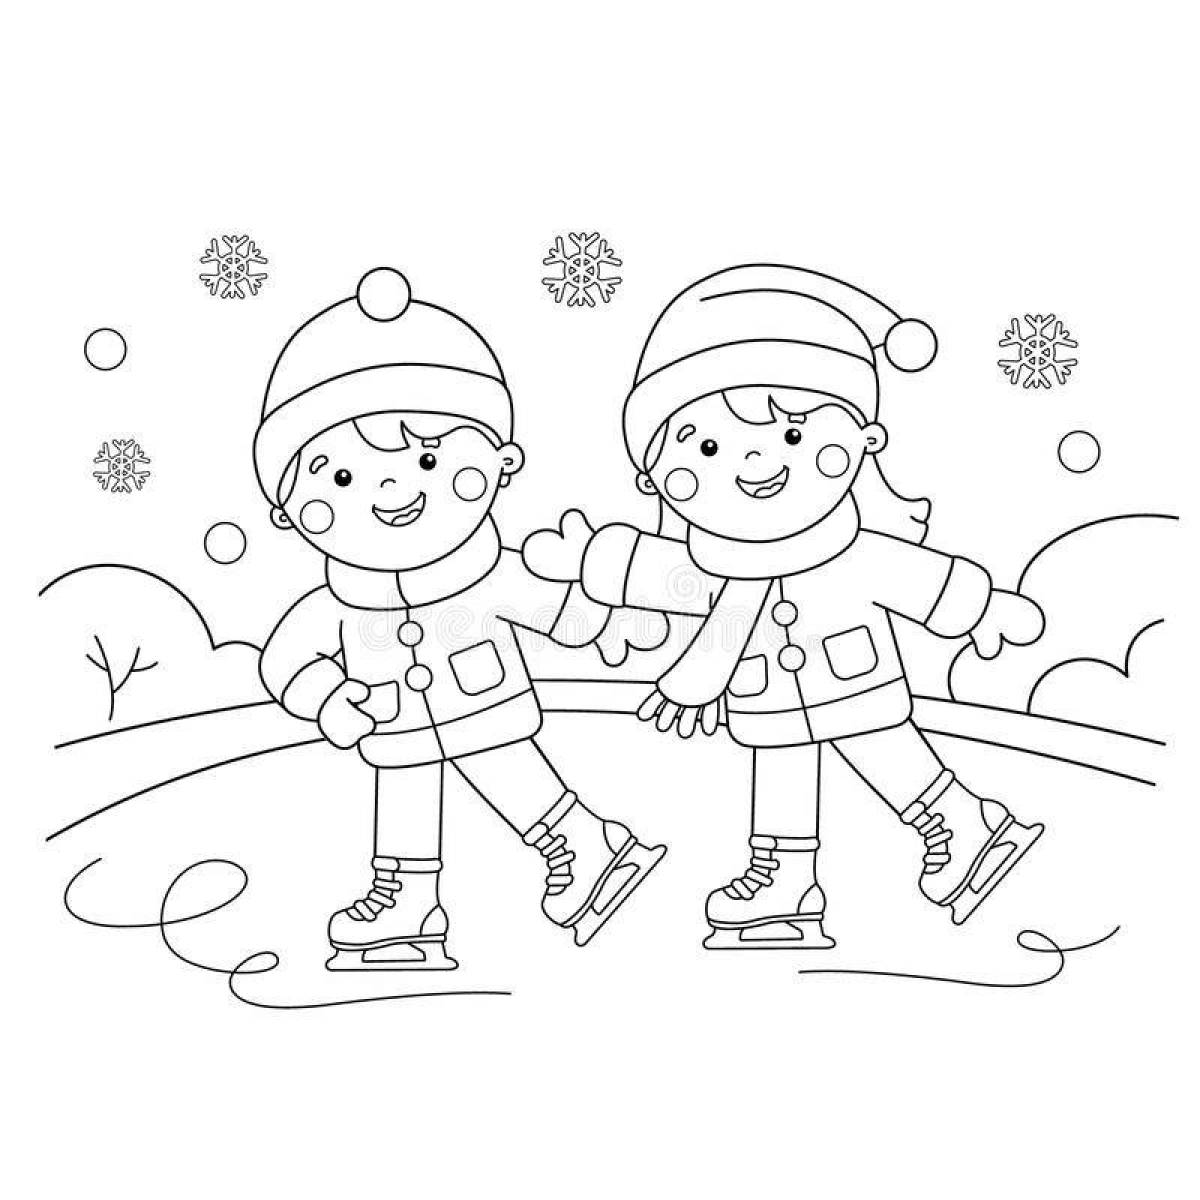 Live coloring winter sports for children